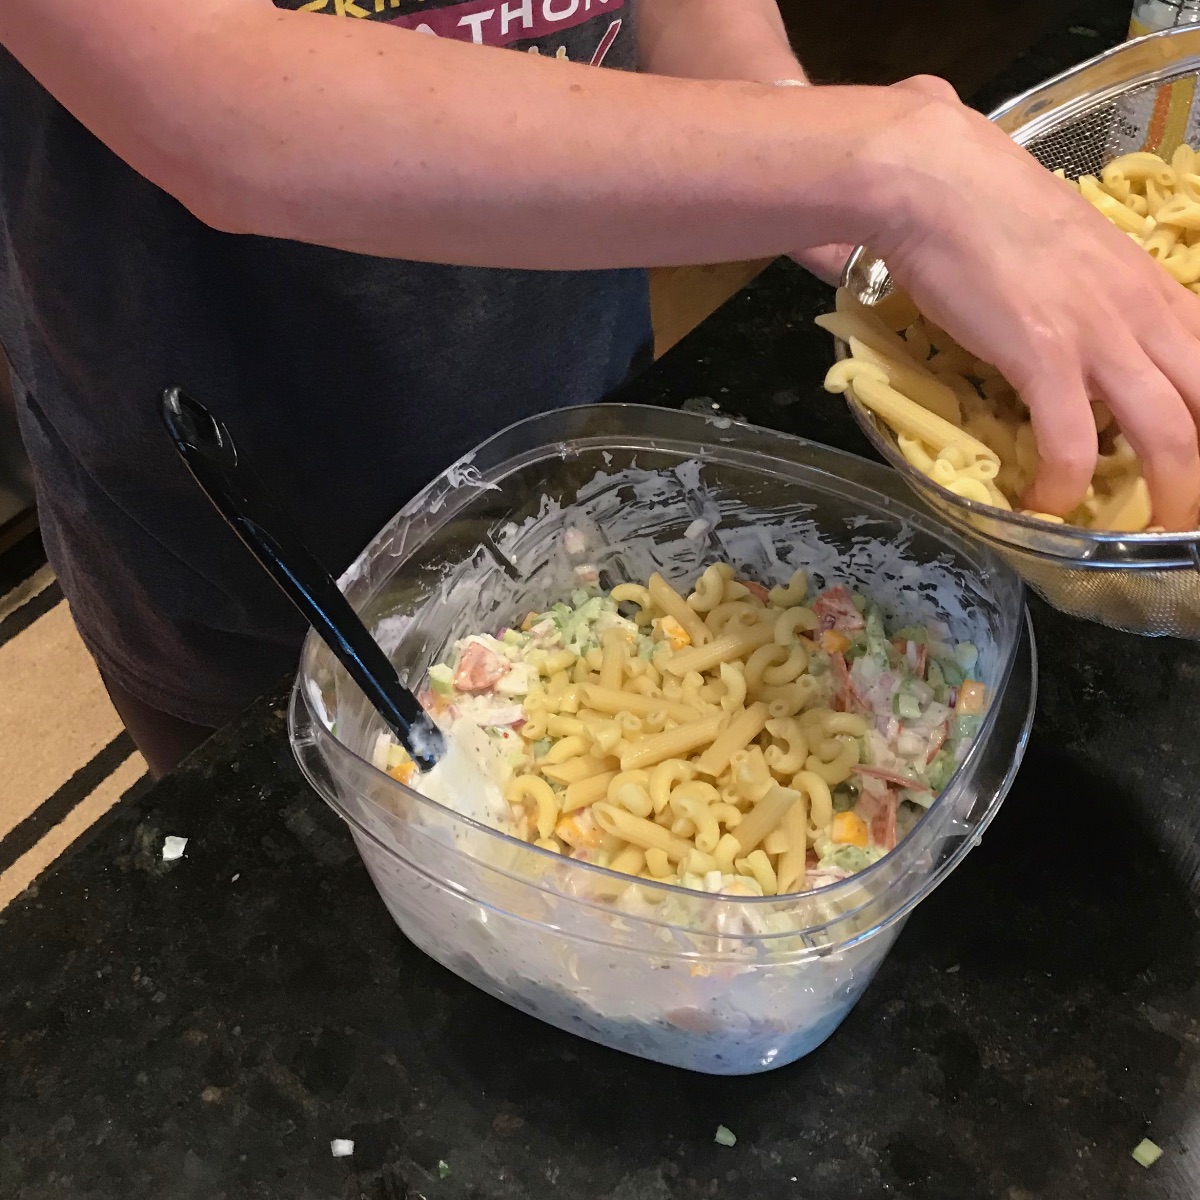 image showing cooked pasta being added to vegetable cheese pasta salad dressing mixture.